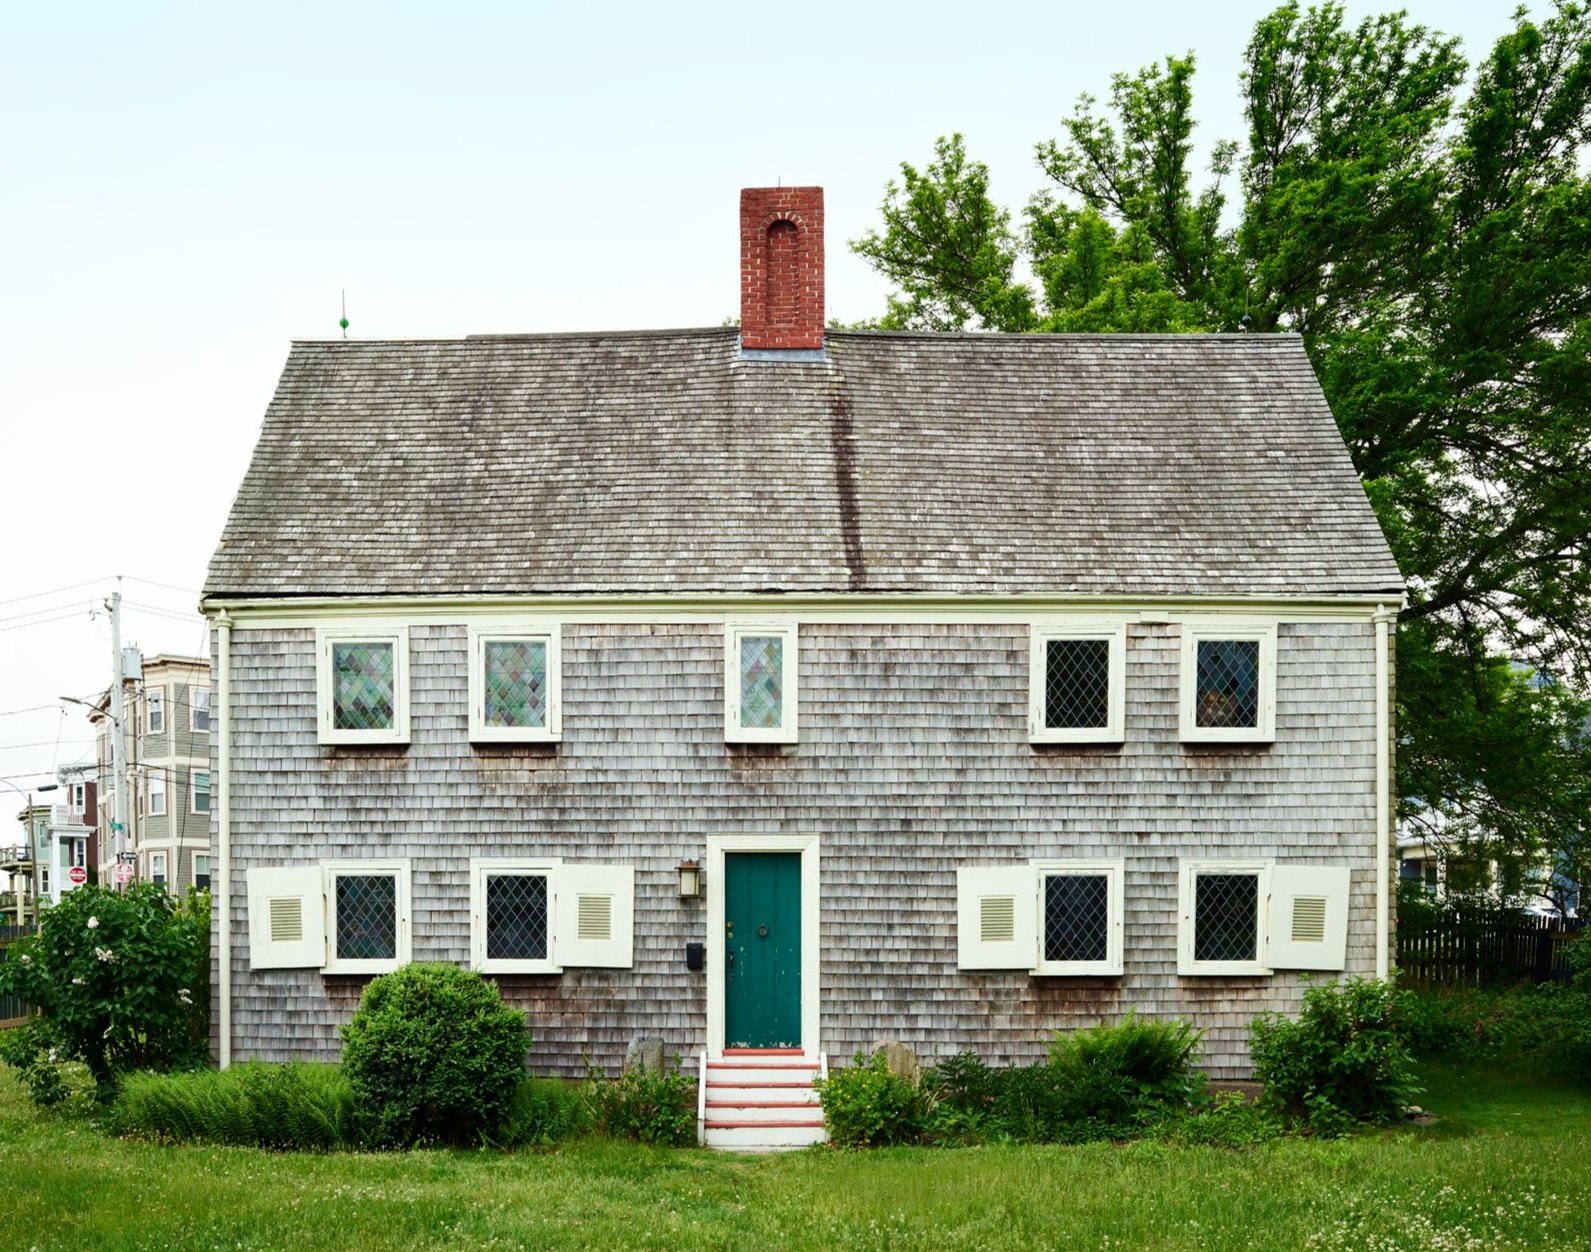 BOSTON'S OLDEST HOME